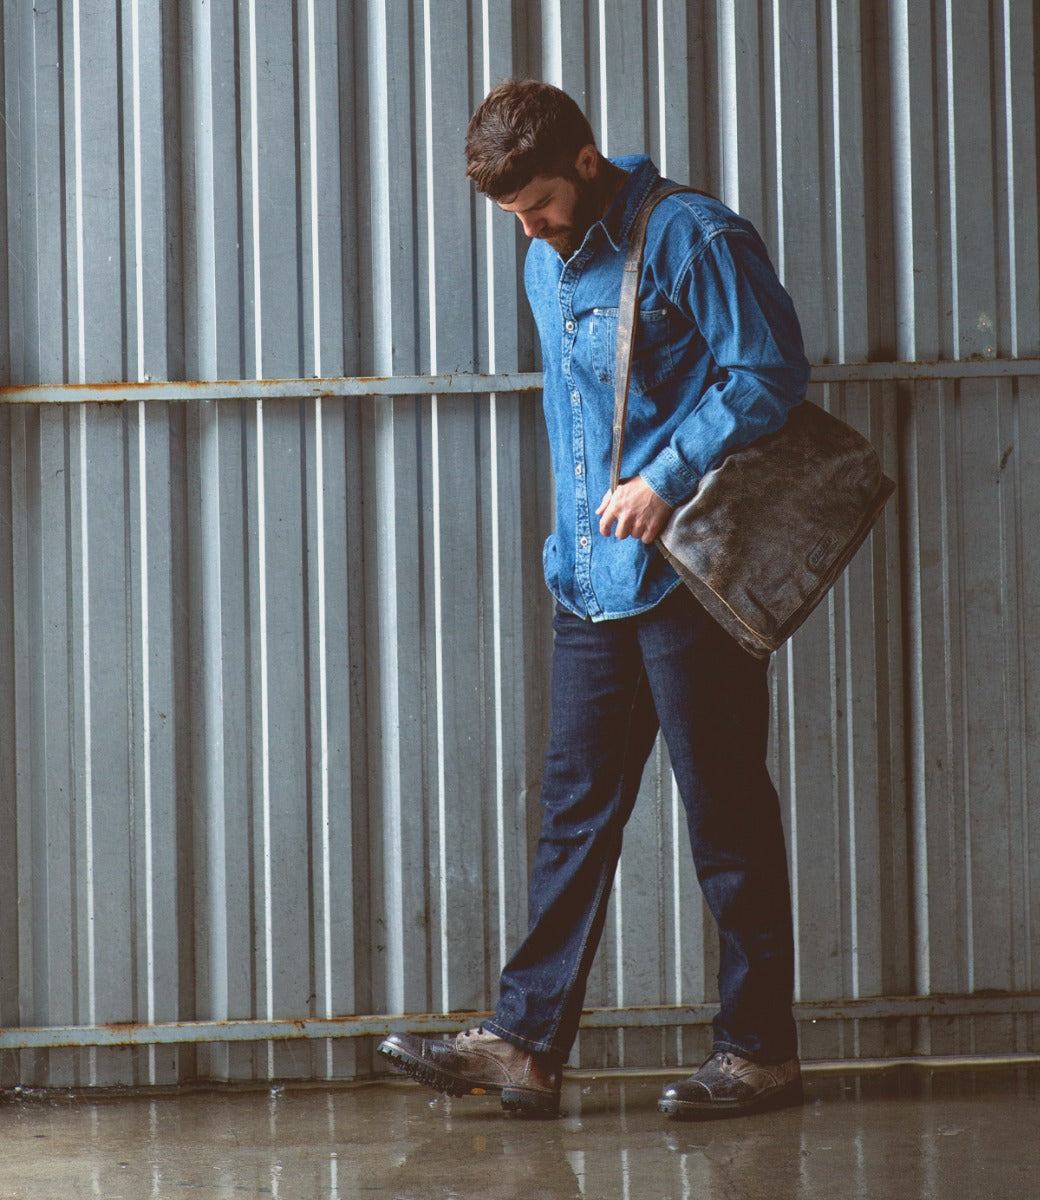 A man in a denim jacket and jeans carries a Bed Stu Protege Trek bag while walking by a corrugated metal wall in the rain, his combat style boots splashing through puddles.